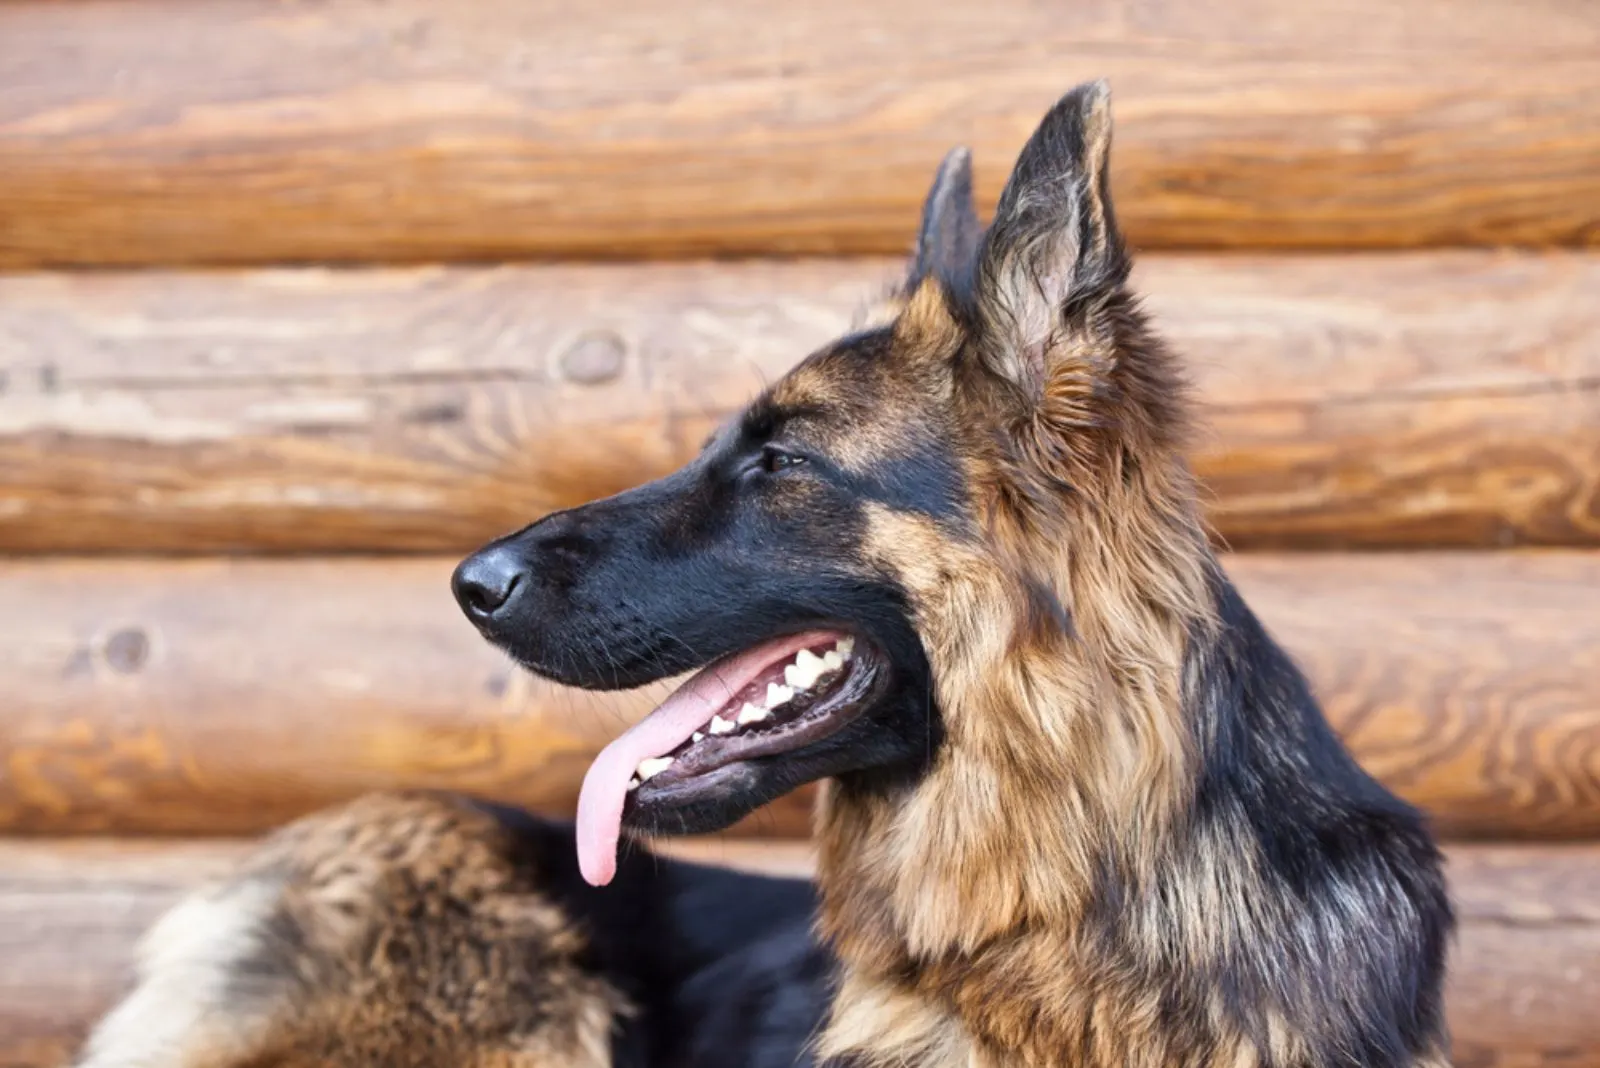 German Shepherd portrait with open mouth and protruding tongue